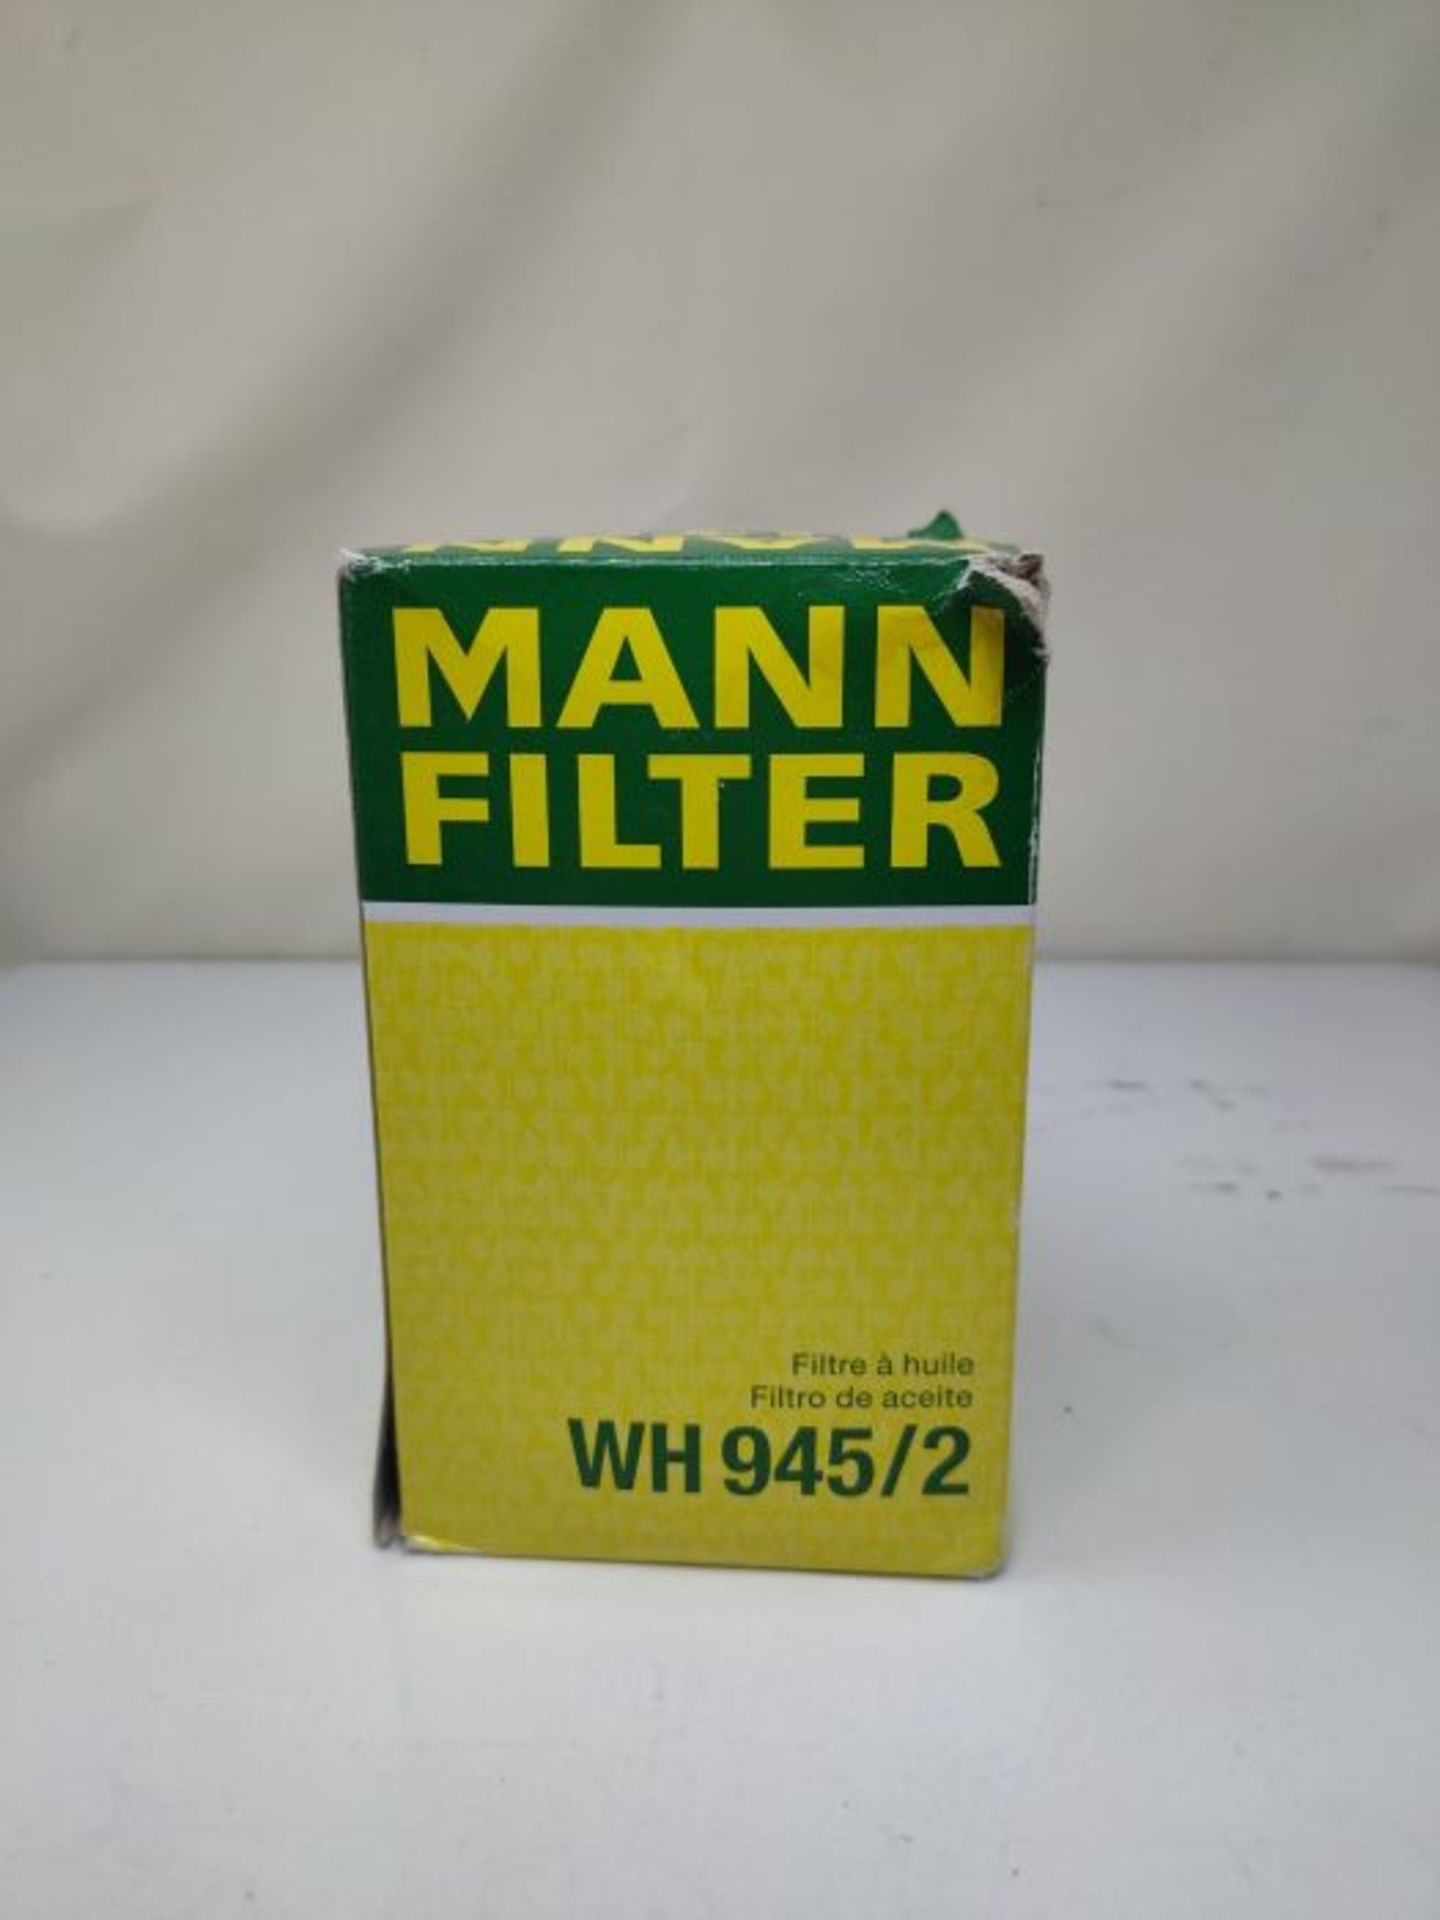 Original MANN-FILTER Oilfilter WH 945/2 - Hydraulic filter - For Utility Vehicles - Image 2 of 3